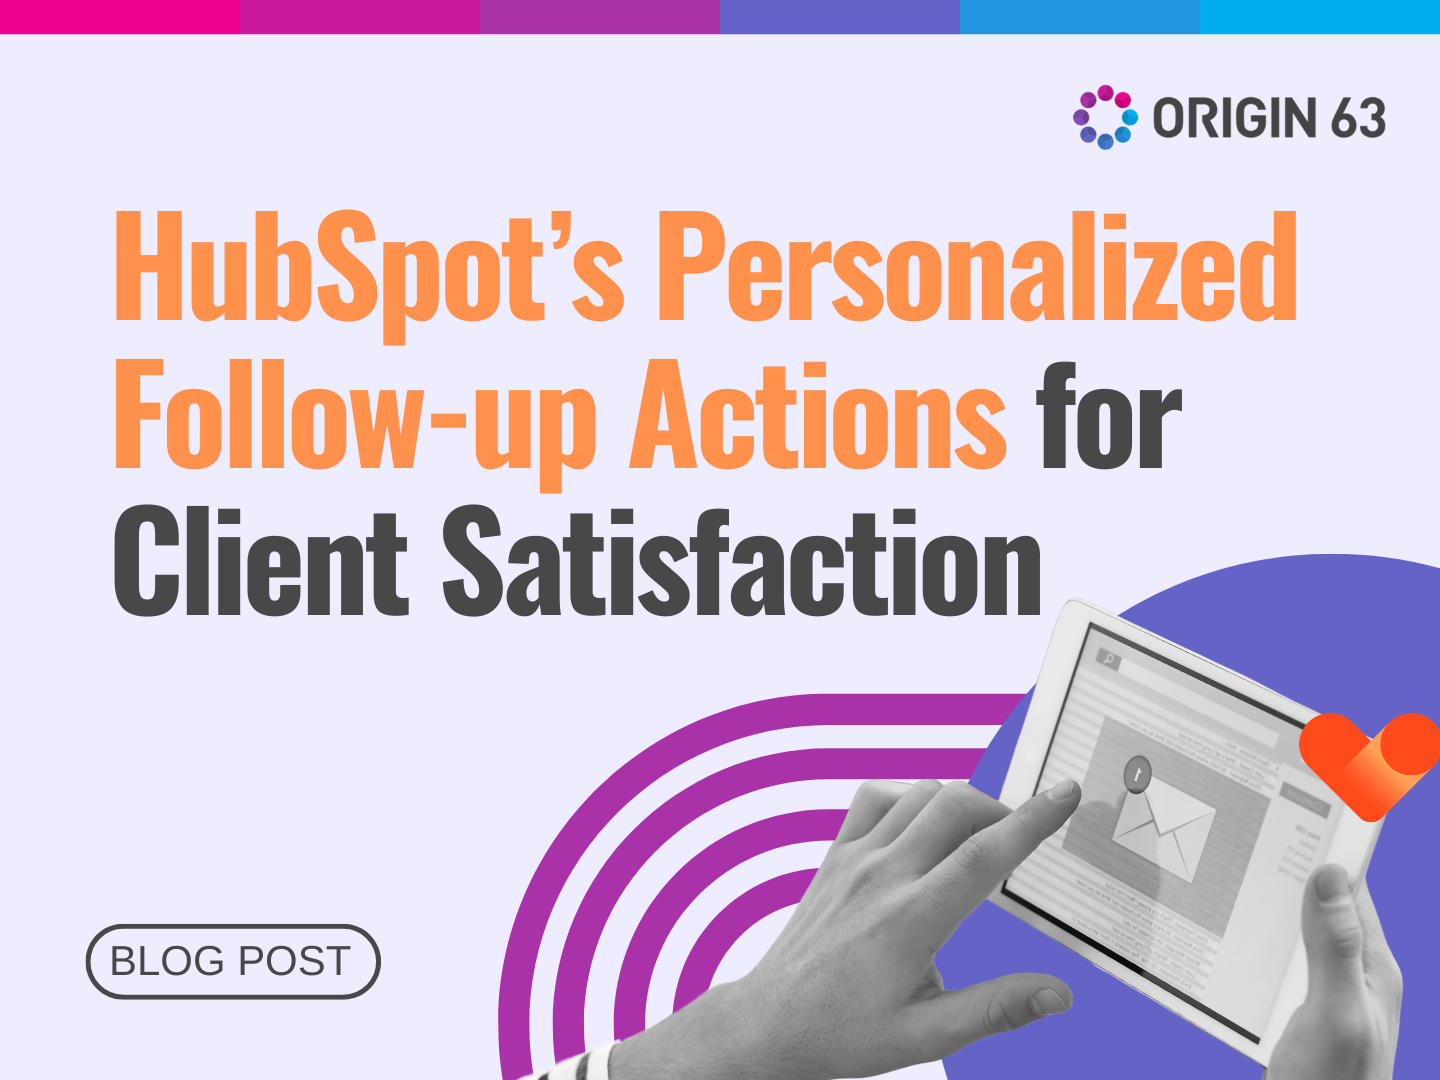 Learn how HubSpot's Service Hub can enhance customer satisfaction with personalized follow-up actions.